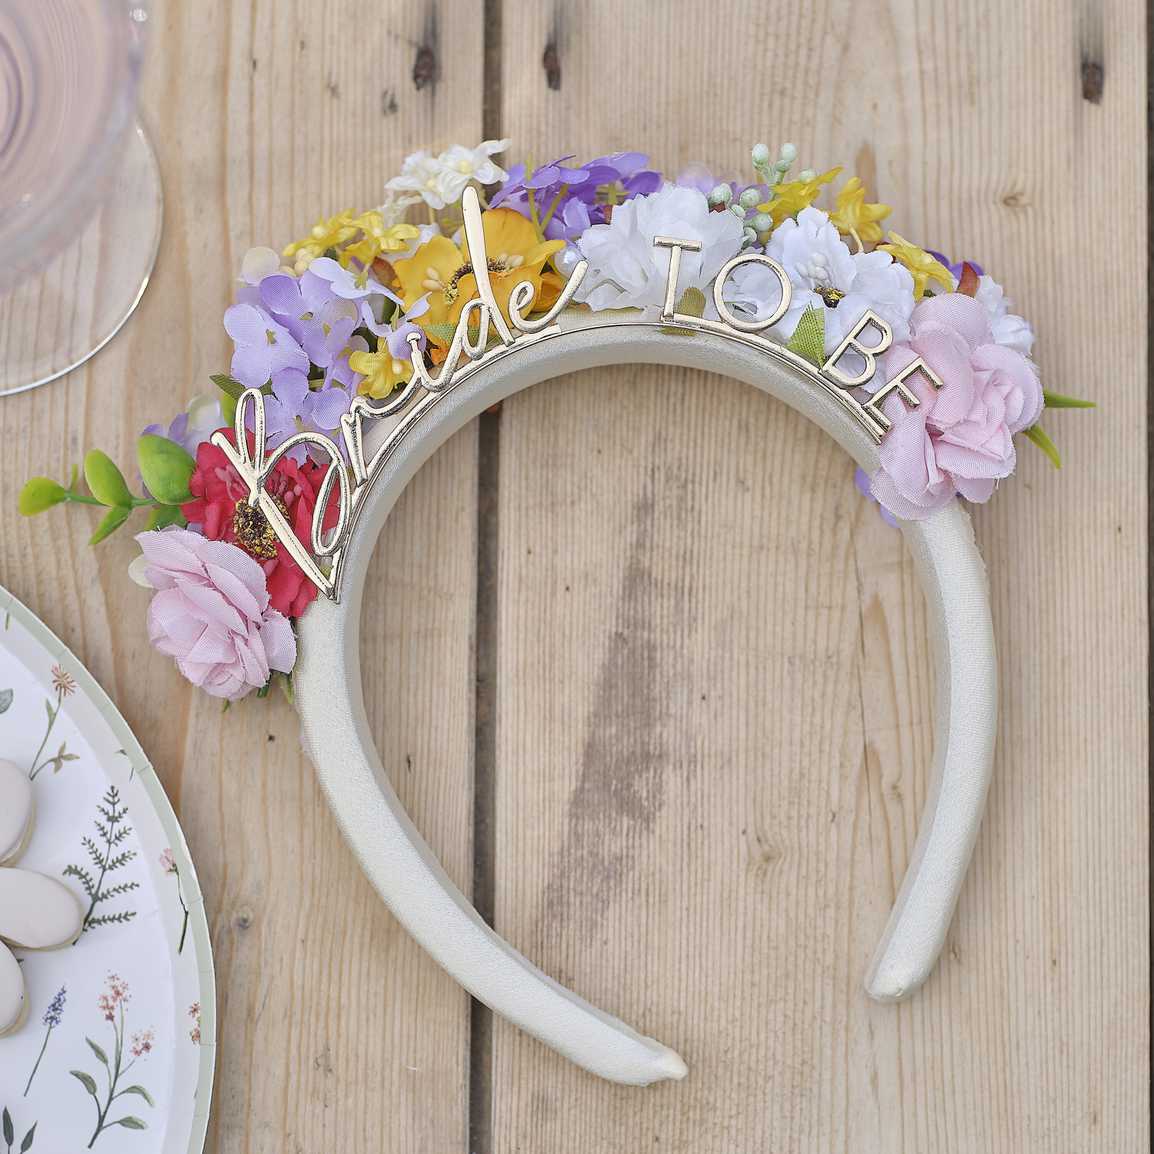 This floral headband is the perfect gift for any bride-to-be who loves to add a touch of floral flair to her celebrations!

l8r.it/ioj3

#henparty #bridalbloom #floralhen #hensupplies #gingerray #joliefeteuk
#stylishhen #hennight #hendo #headband #flowers